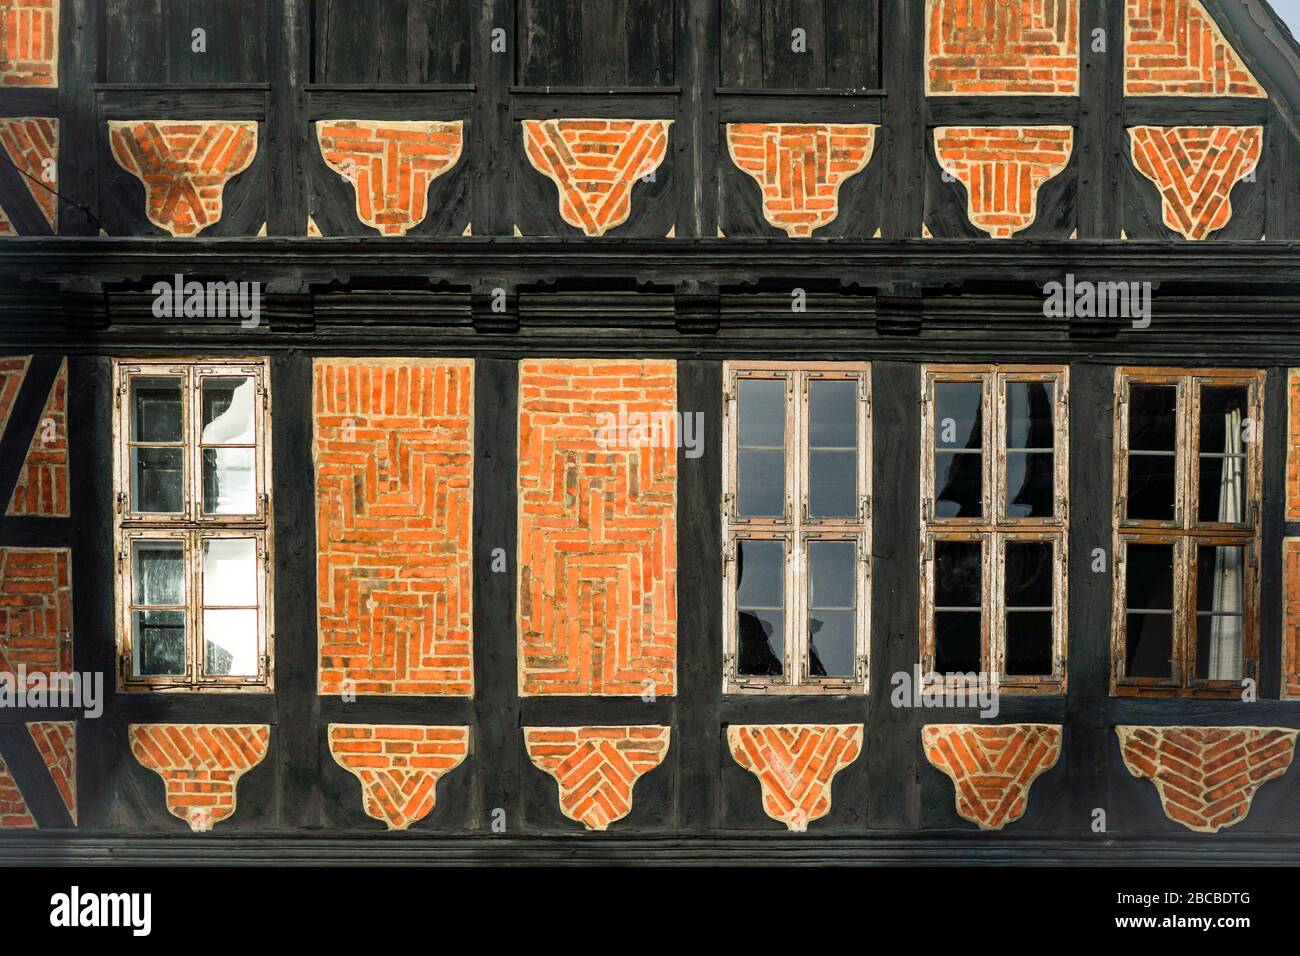 Facade of a half-timbered building with wooden framework, brick and old windows in UNESCO World Heritage Site Goslar, Germany Stock Photo